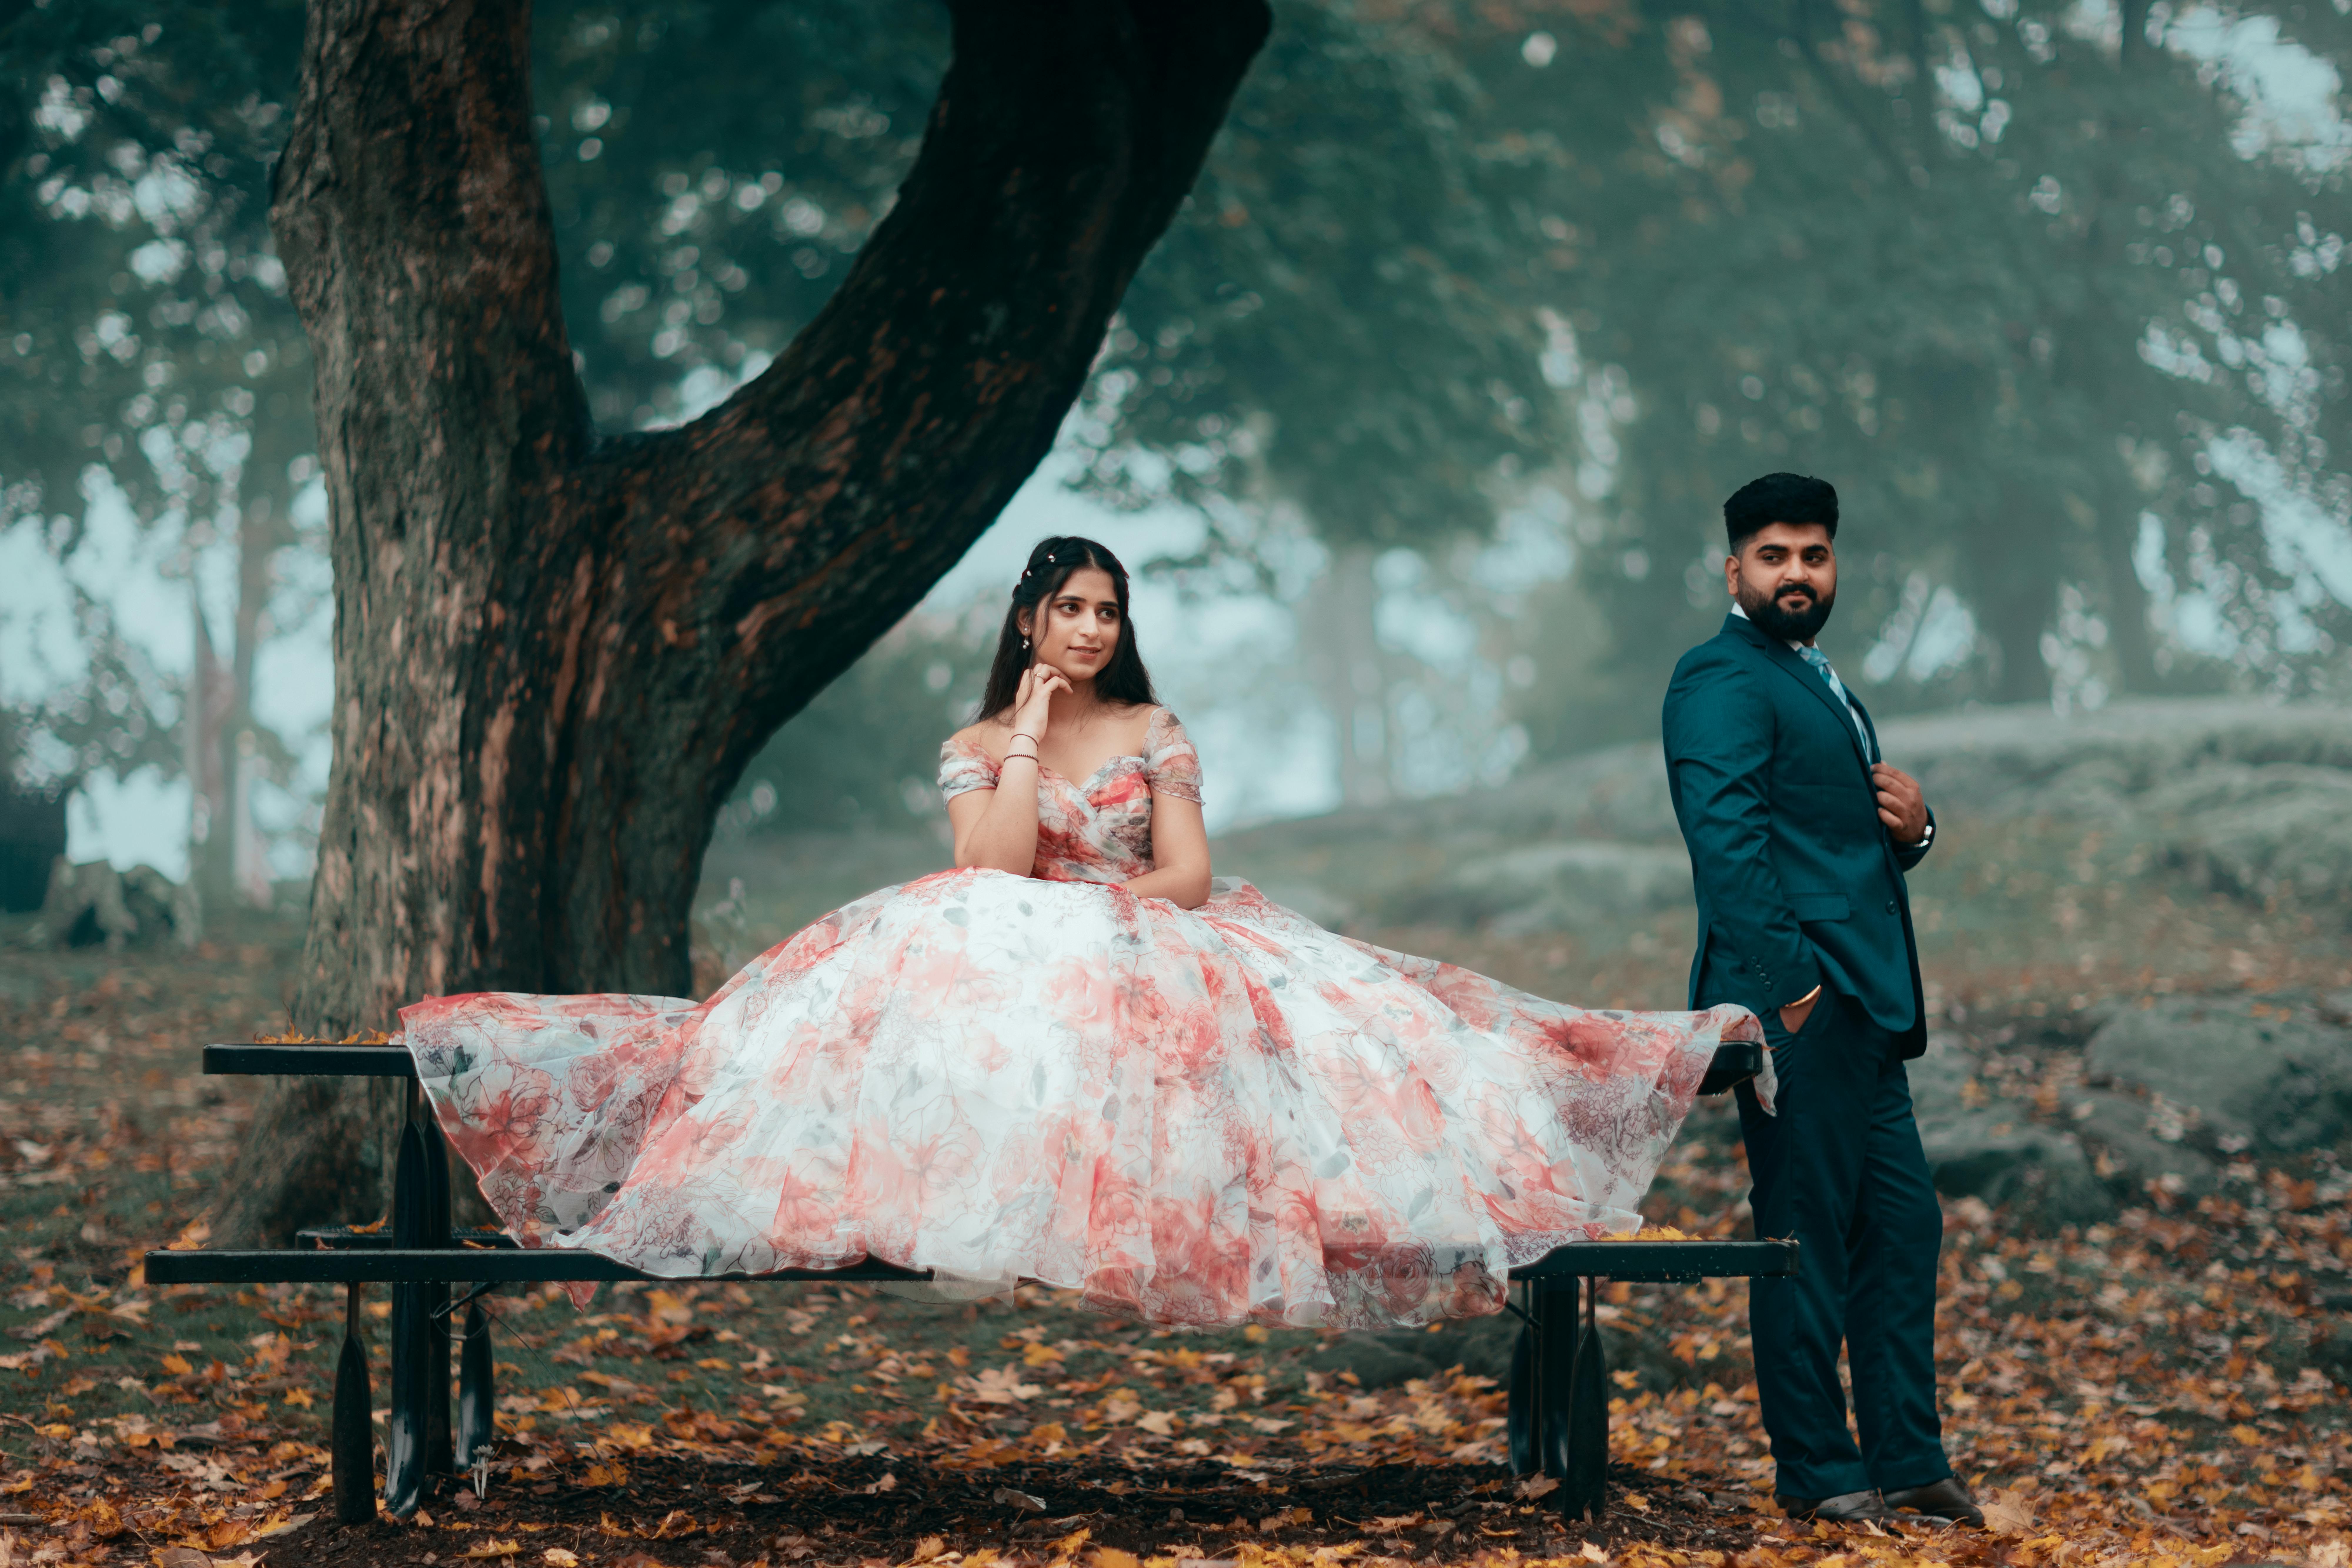 Rain Couldn't Stop This Pre-Wedding Photoshoot – See How We Captured the  Magic Despite the Downpour! – We Create